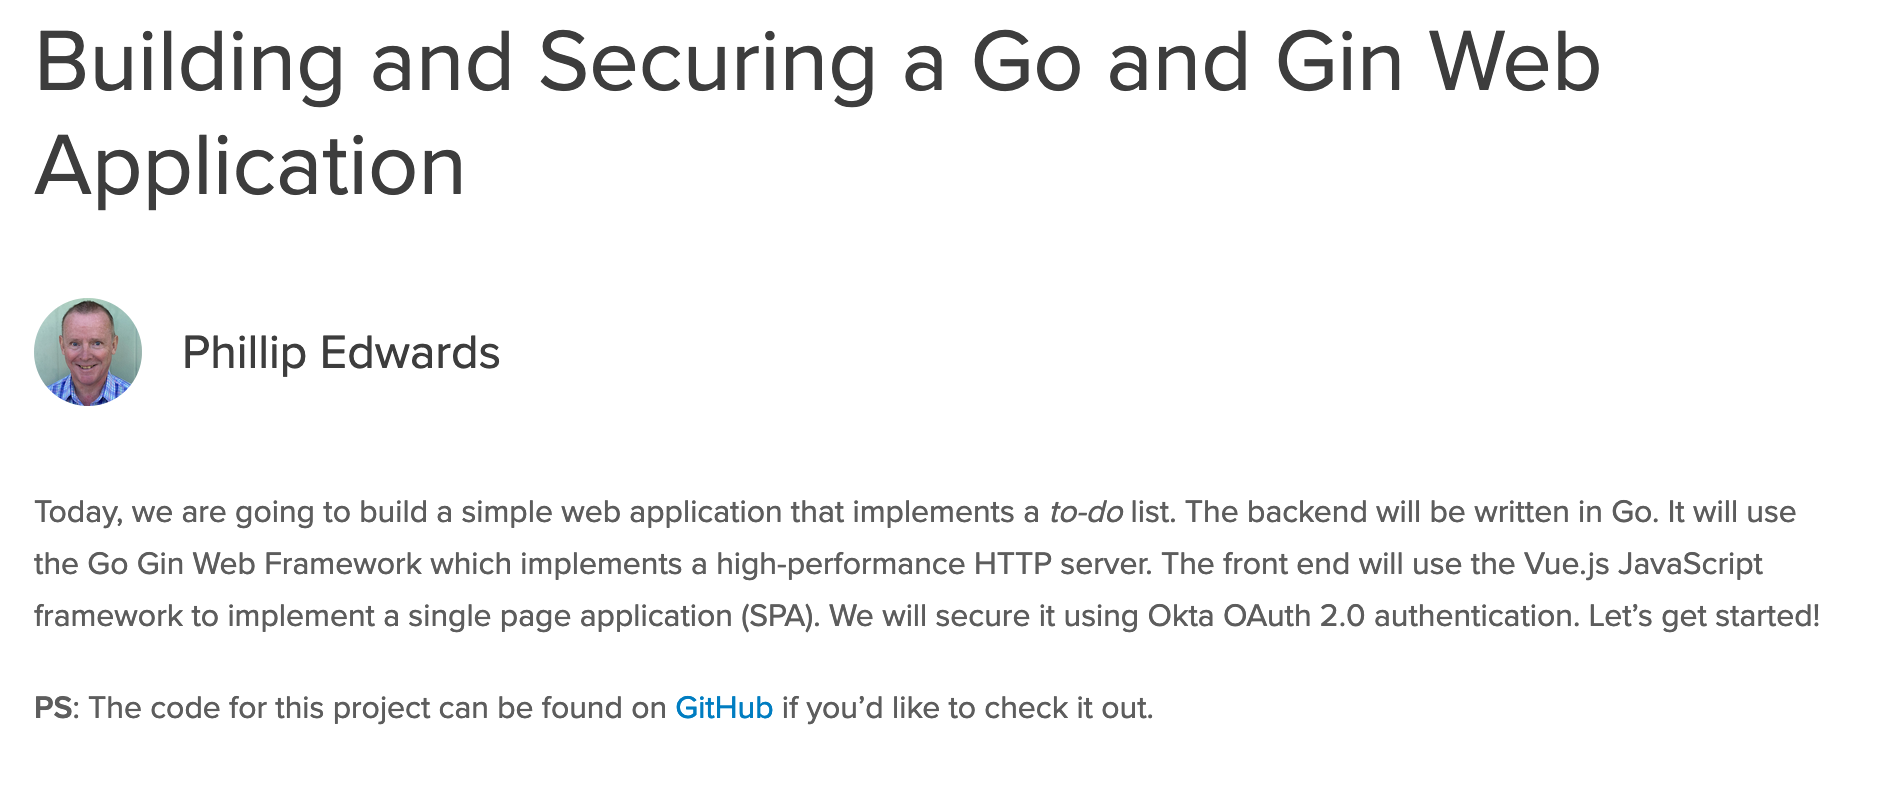 Building and Securing a Go and Gin Web Application